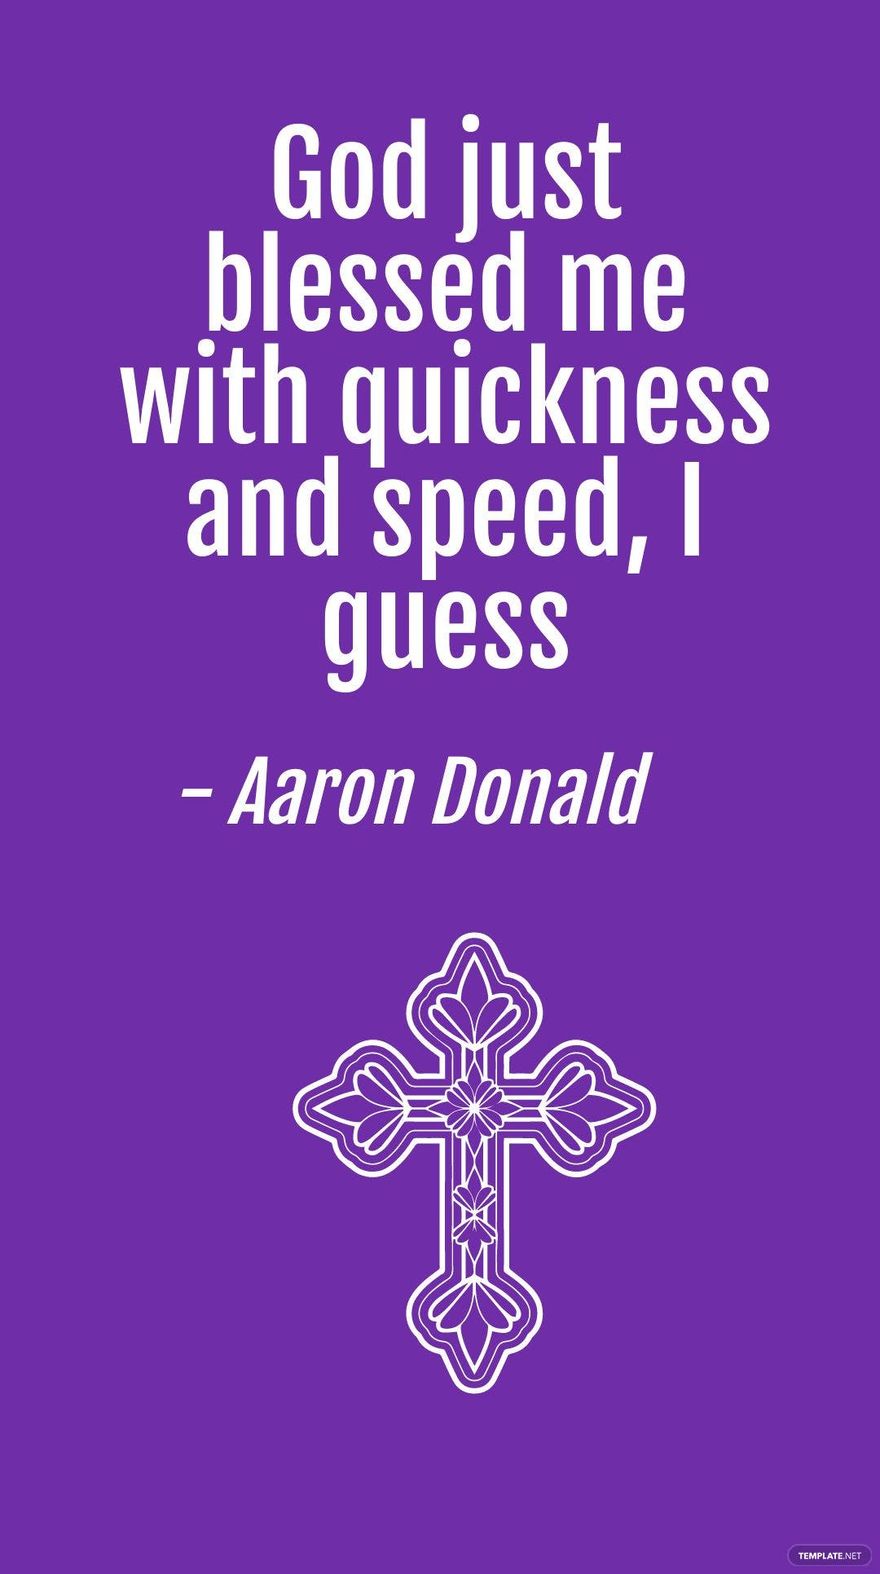 Free Aaron Donald - God just blessed me with quickness and speed, I guess in JPG